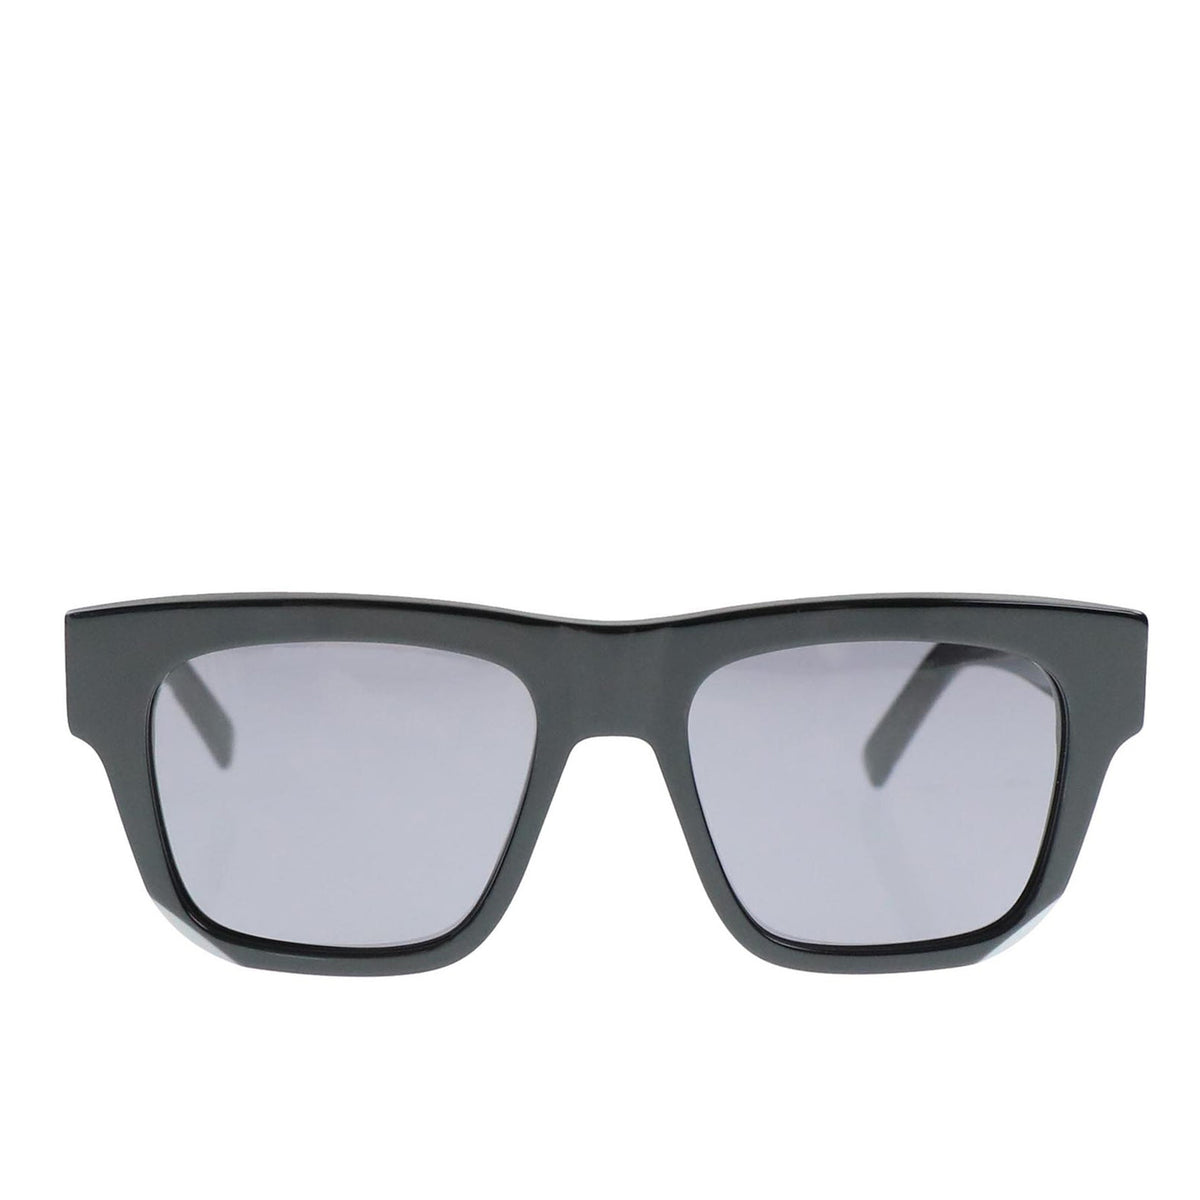 GIVENCHY FW22 SUNGLASSES / BLK - NUBIAN